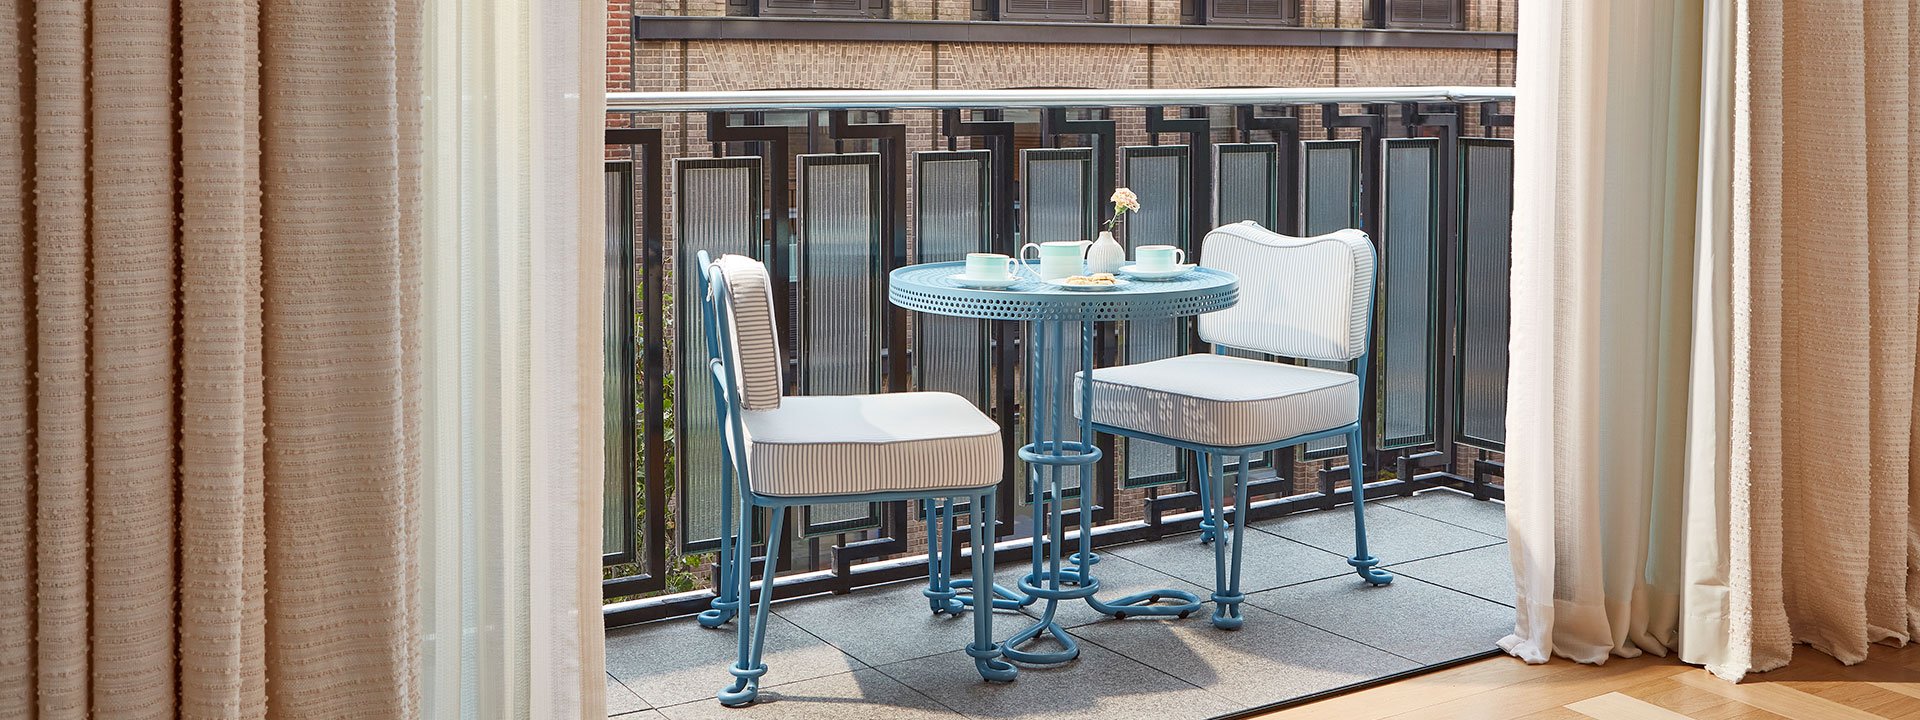 Mayfair Balcony room balcony with table and chairs